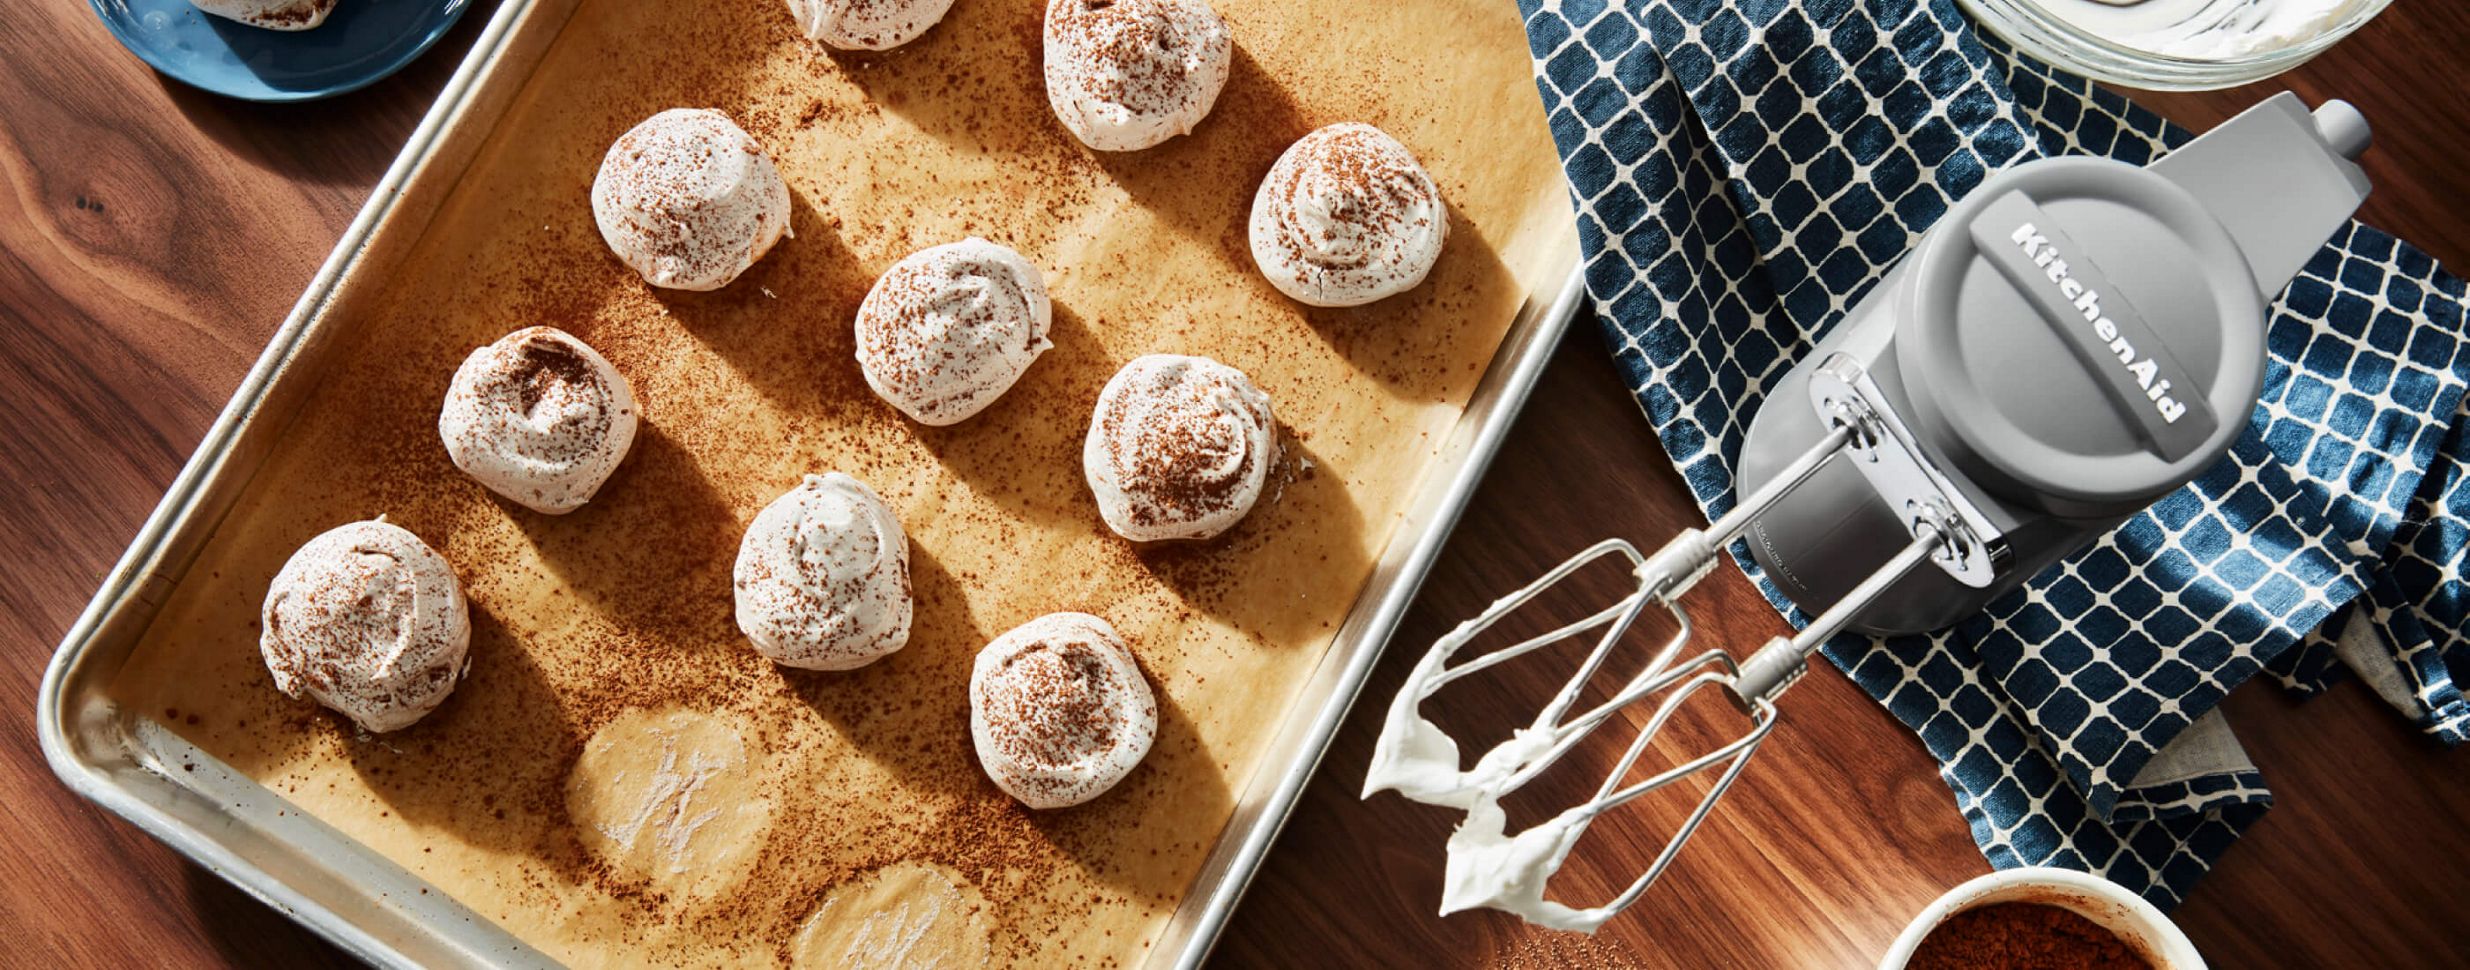 Freshly-made meringues resting on parchment paper in a baking sheet.